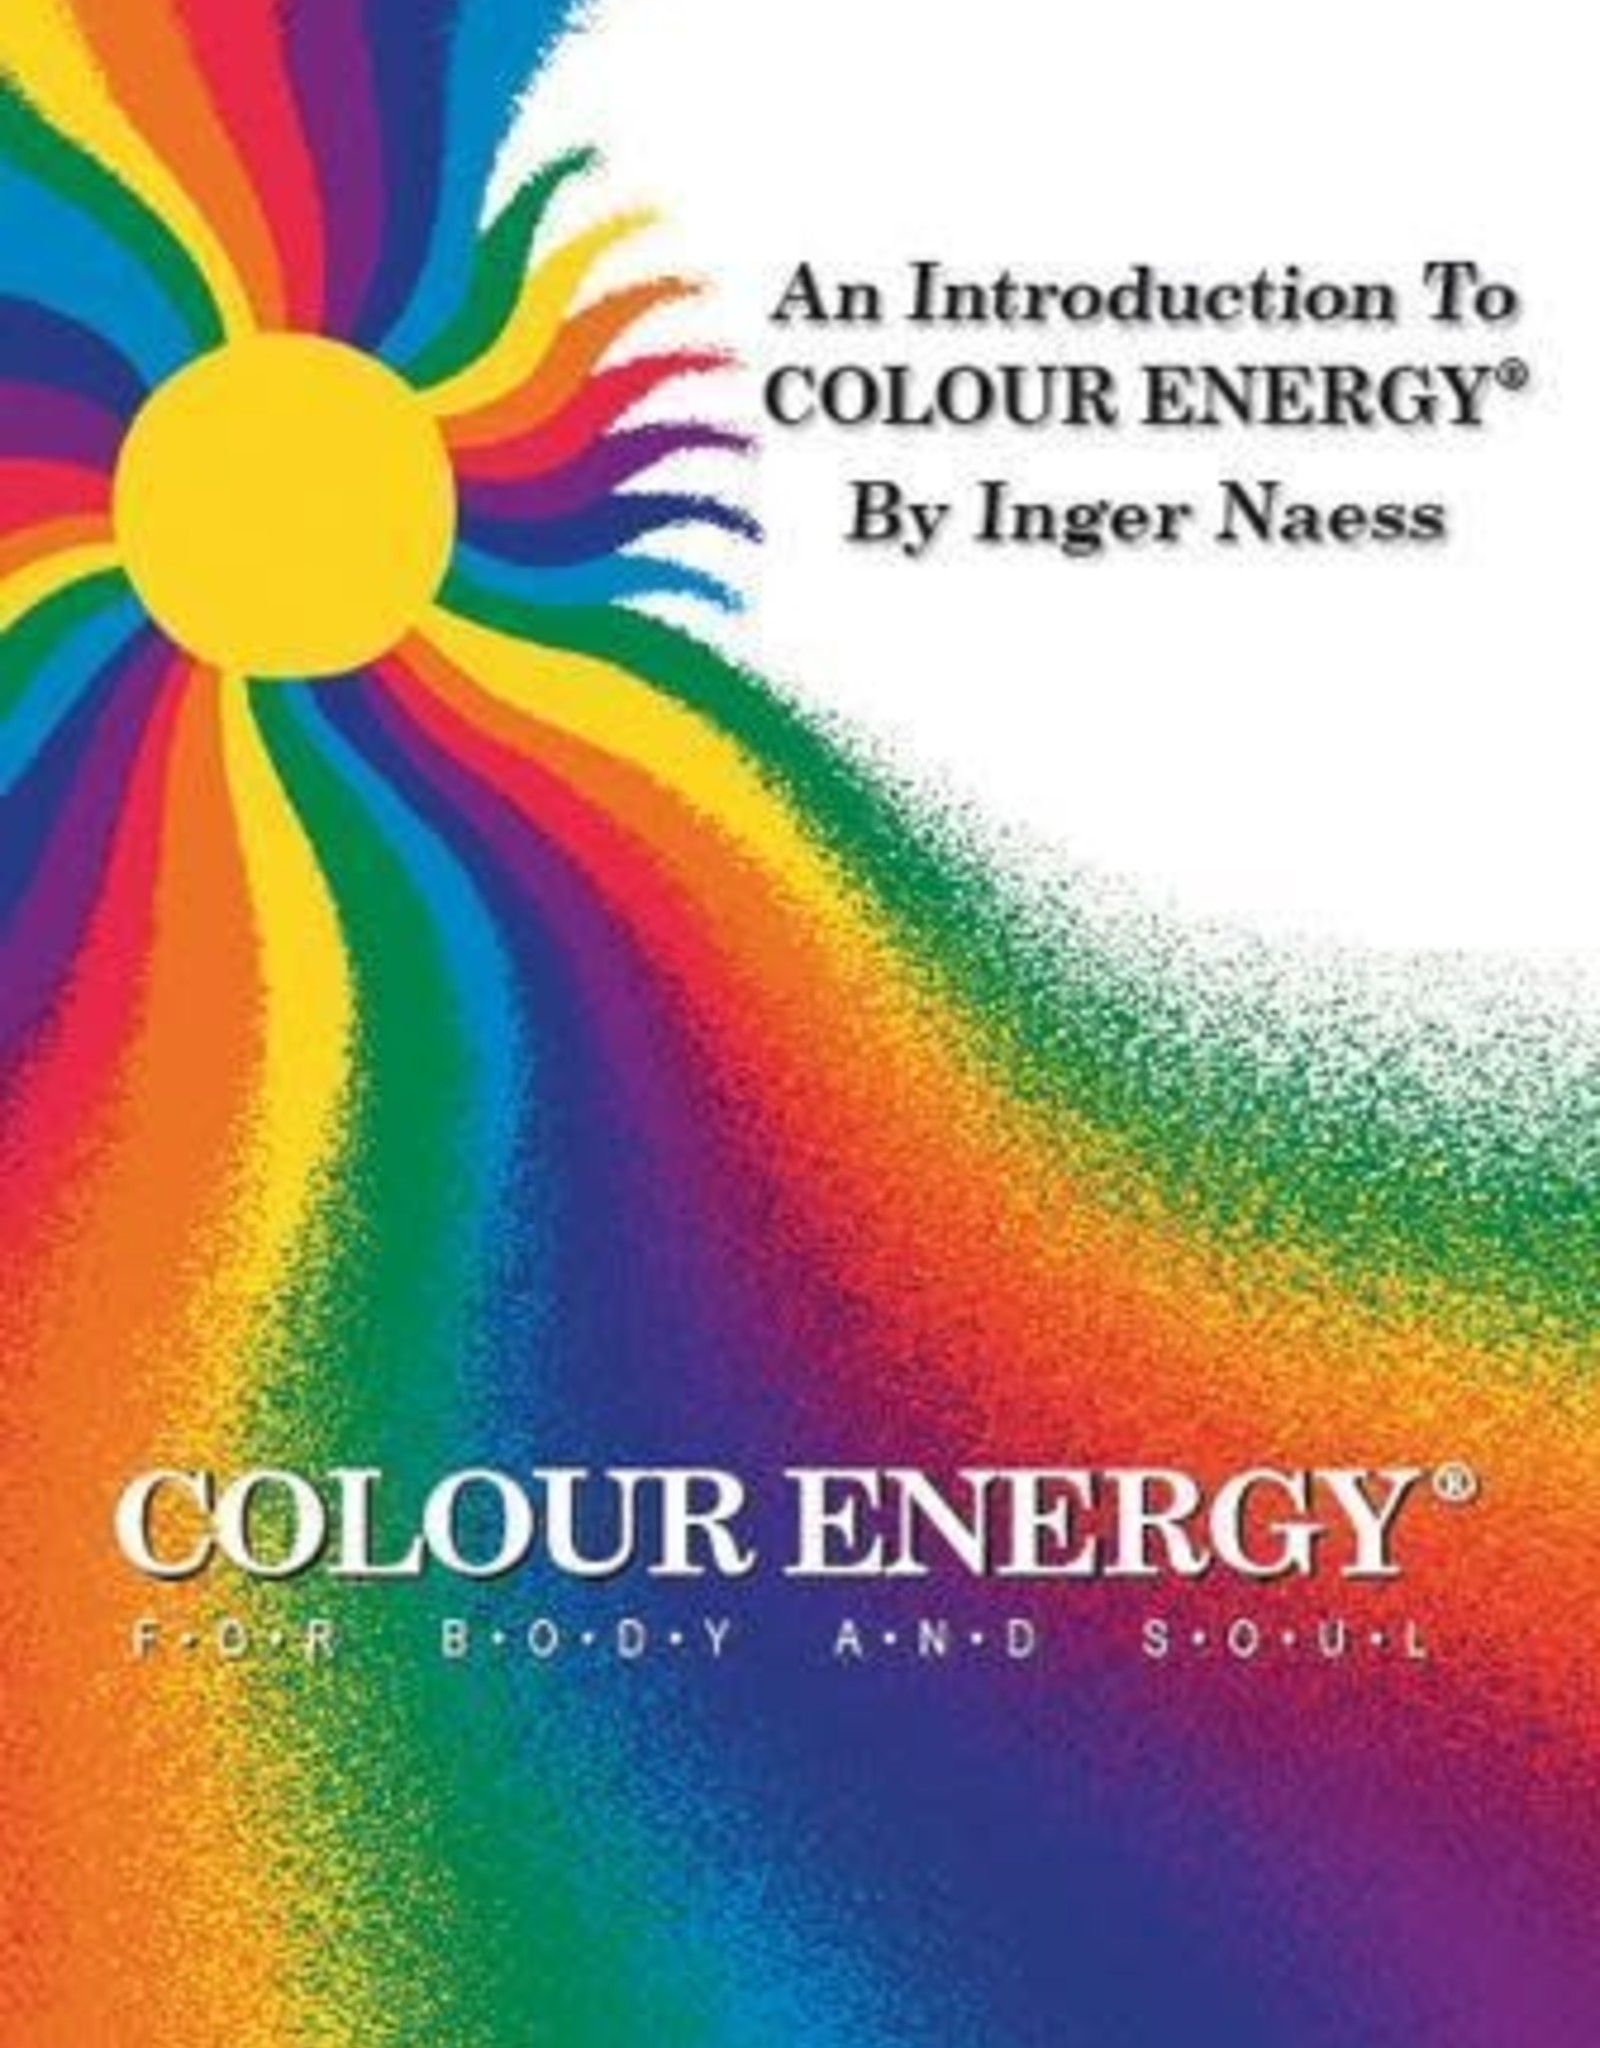 Introduction to Colour Energy Booklet